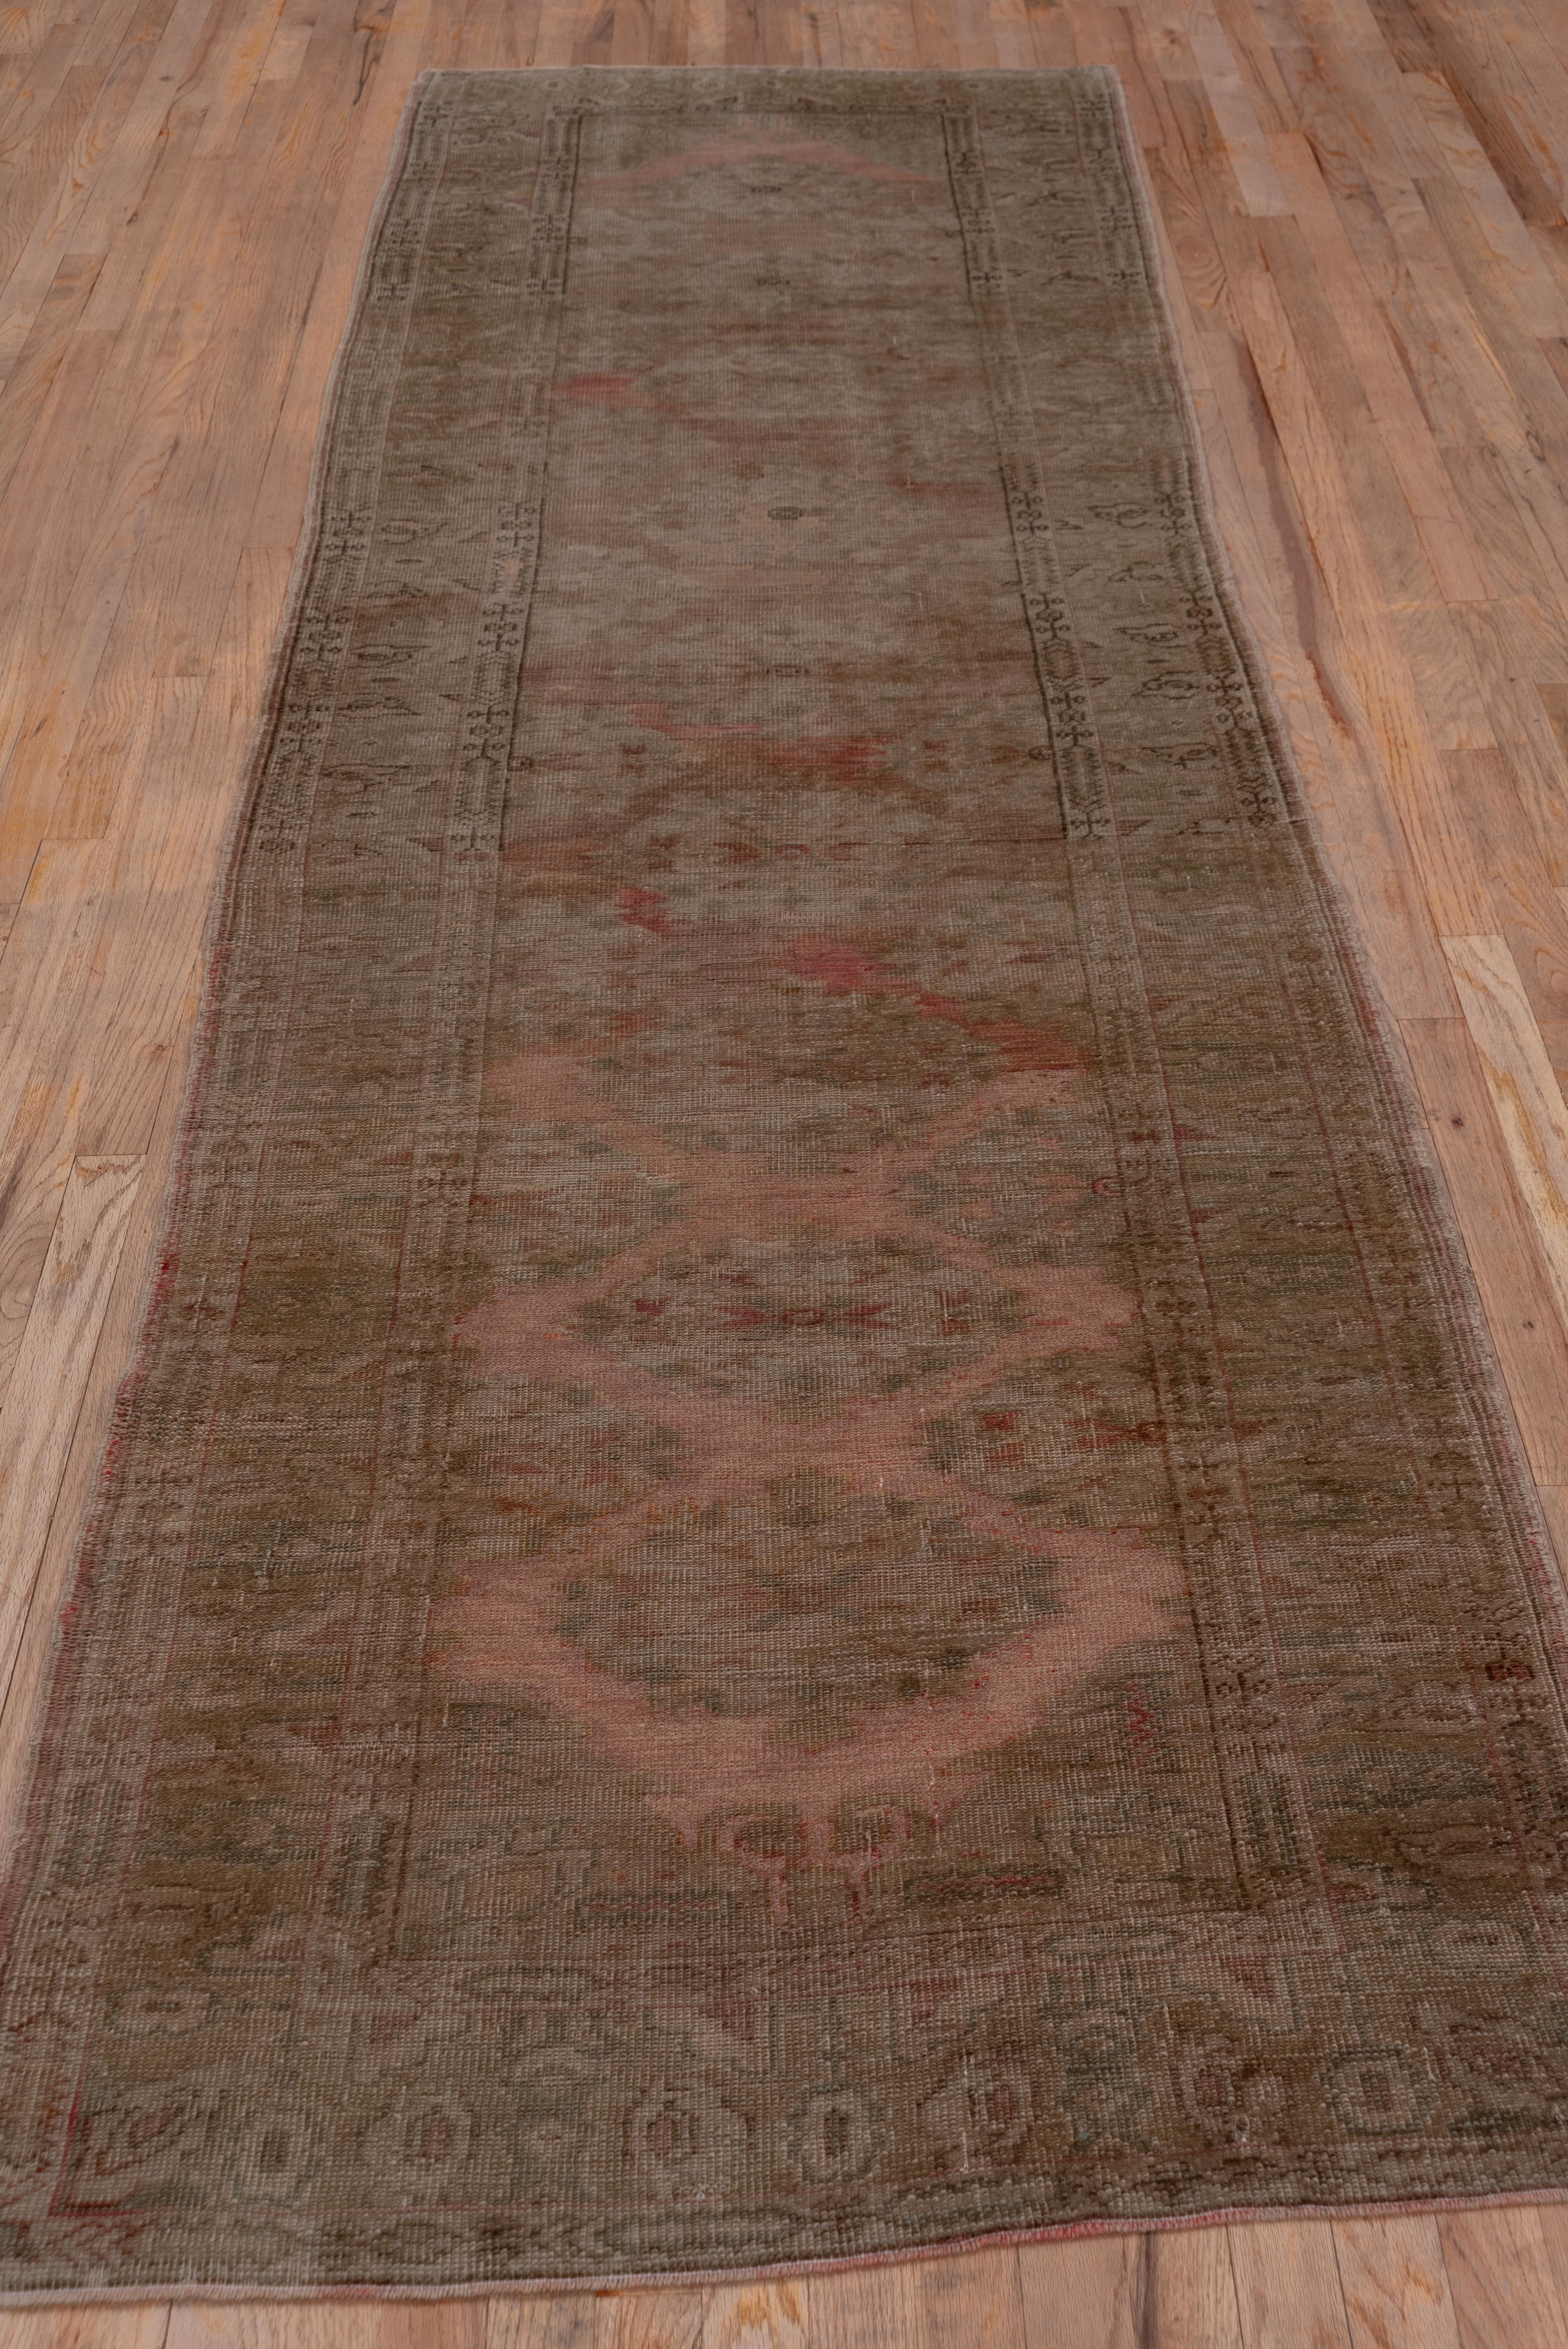 The light tan field of this west Turkish workshop runner displays a symmetric palmette pattern while the main border shows a naive leaf pattern. The condition is erratically low and lower. Sections of the minor borders and other details are rendered